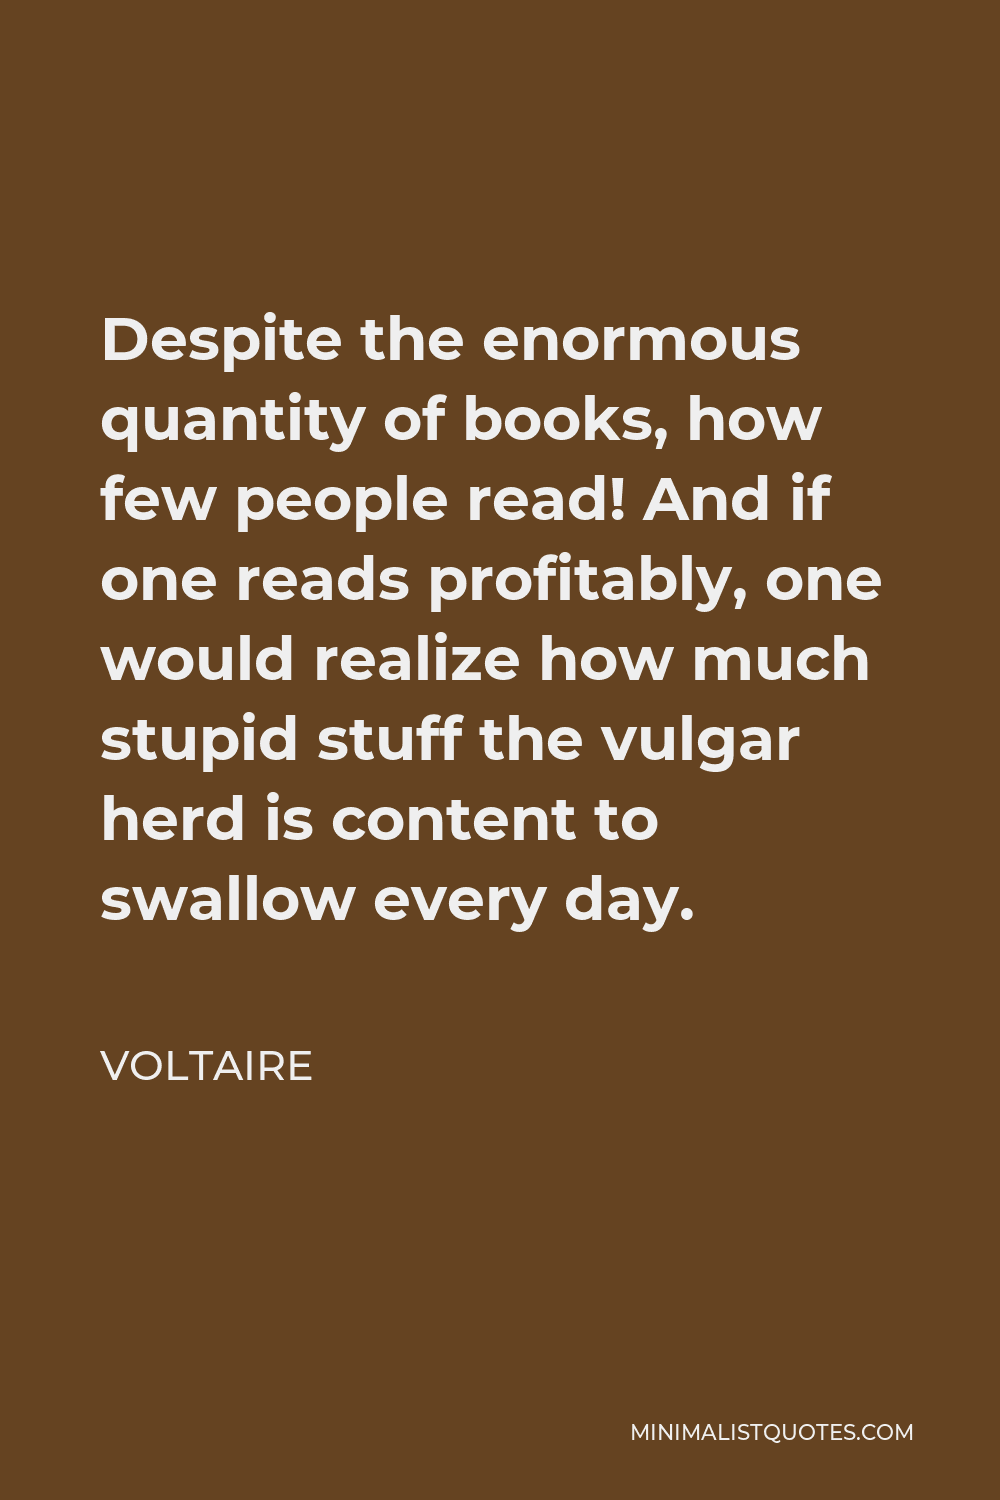 Voltaire Quote - Despite the enormous quantity of books, how few people read! And if one reads profitably, one would realize how much stupid stuff the vulgar herd is content to swallow every day.